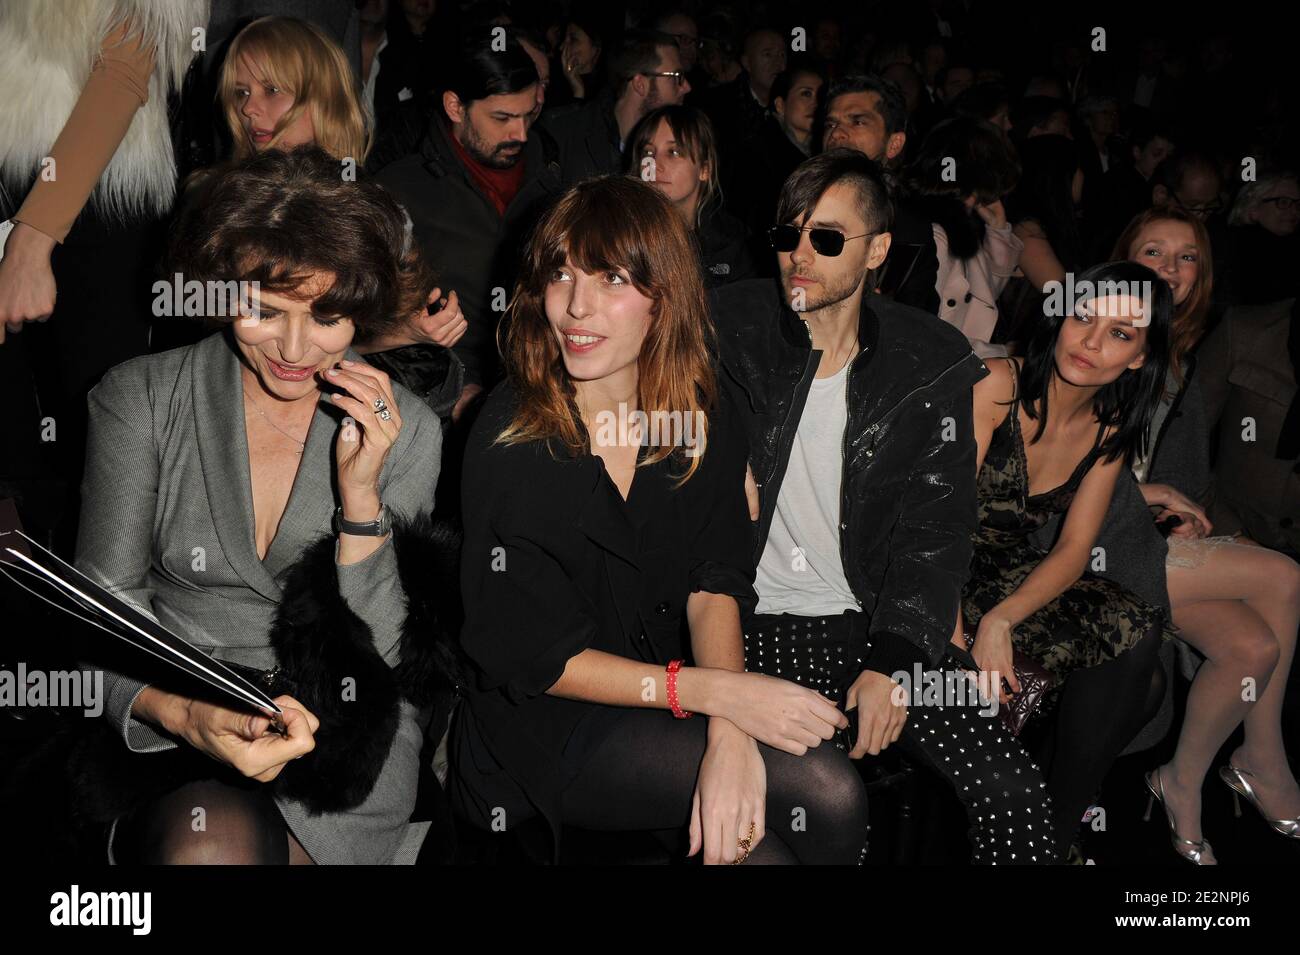 (L-R) Fanny Ardant, Lou Doillon, Jared Leto and Leigh Lezard front row for the Dior Fall-Winter 2010/2011 Ready-to-Wear fashion show held at the Tuileries in Paris, France on March 5, 2010. Photo by Briquet-Nebinger-Guibbaud-Orban/ABACAPRESS.COM Stock Photo